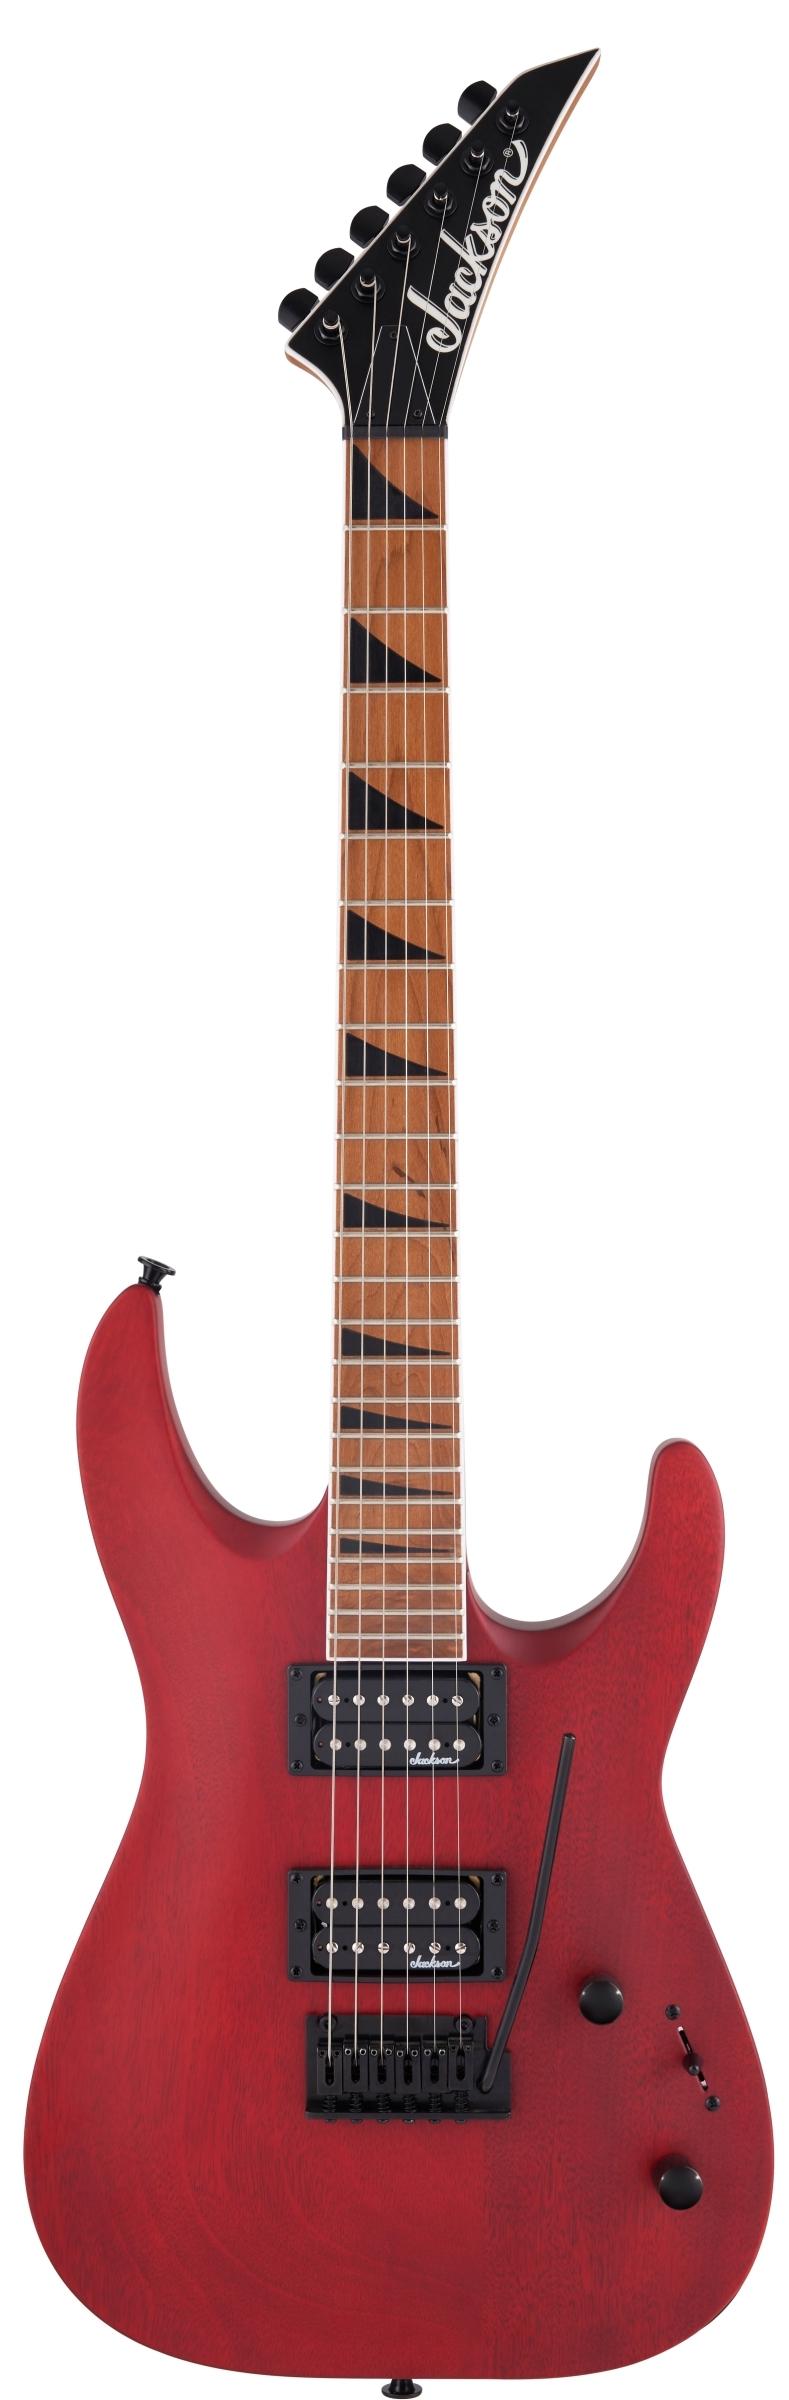 Электрогитары Jackson JS Series Dinky™ Arch Top JS24 DKAM Red Stain электрогитары jackson js series dinky™ arch top js24 dkam red stain